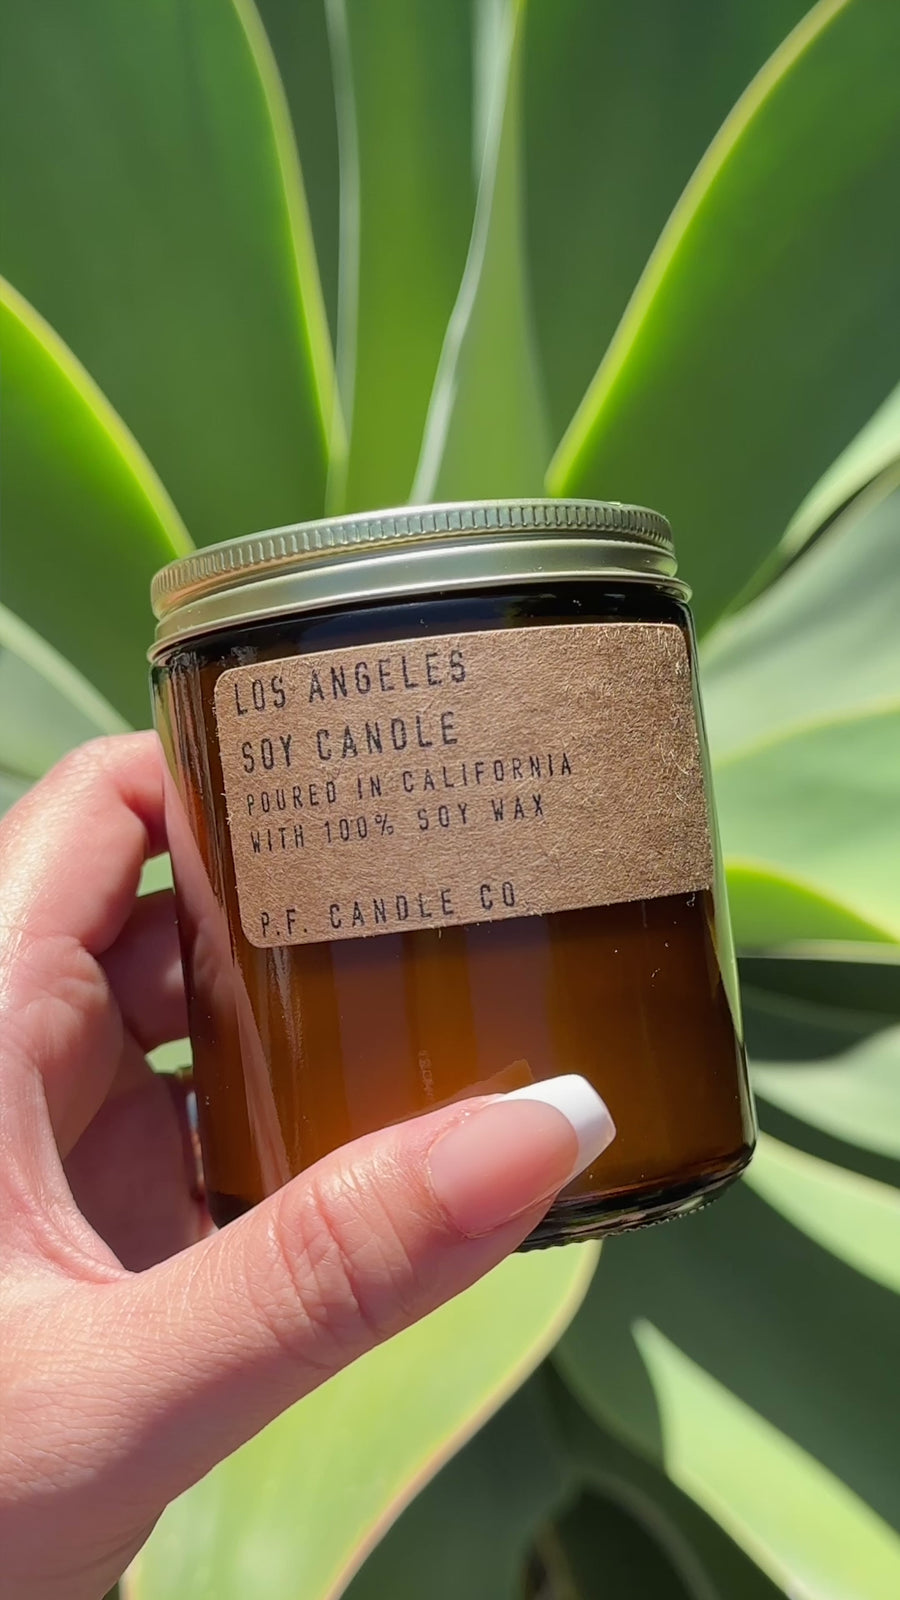 model showcasing 'los angeles' soy candle